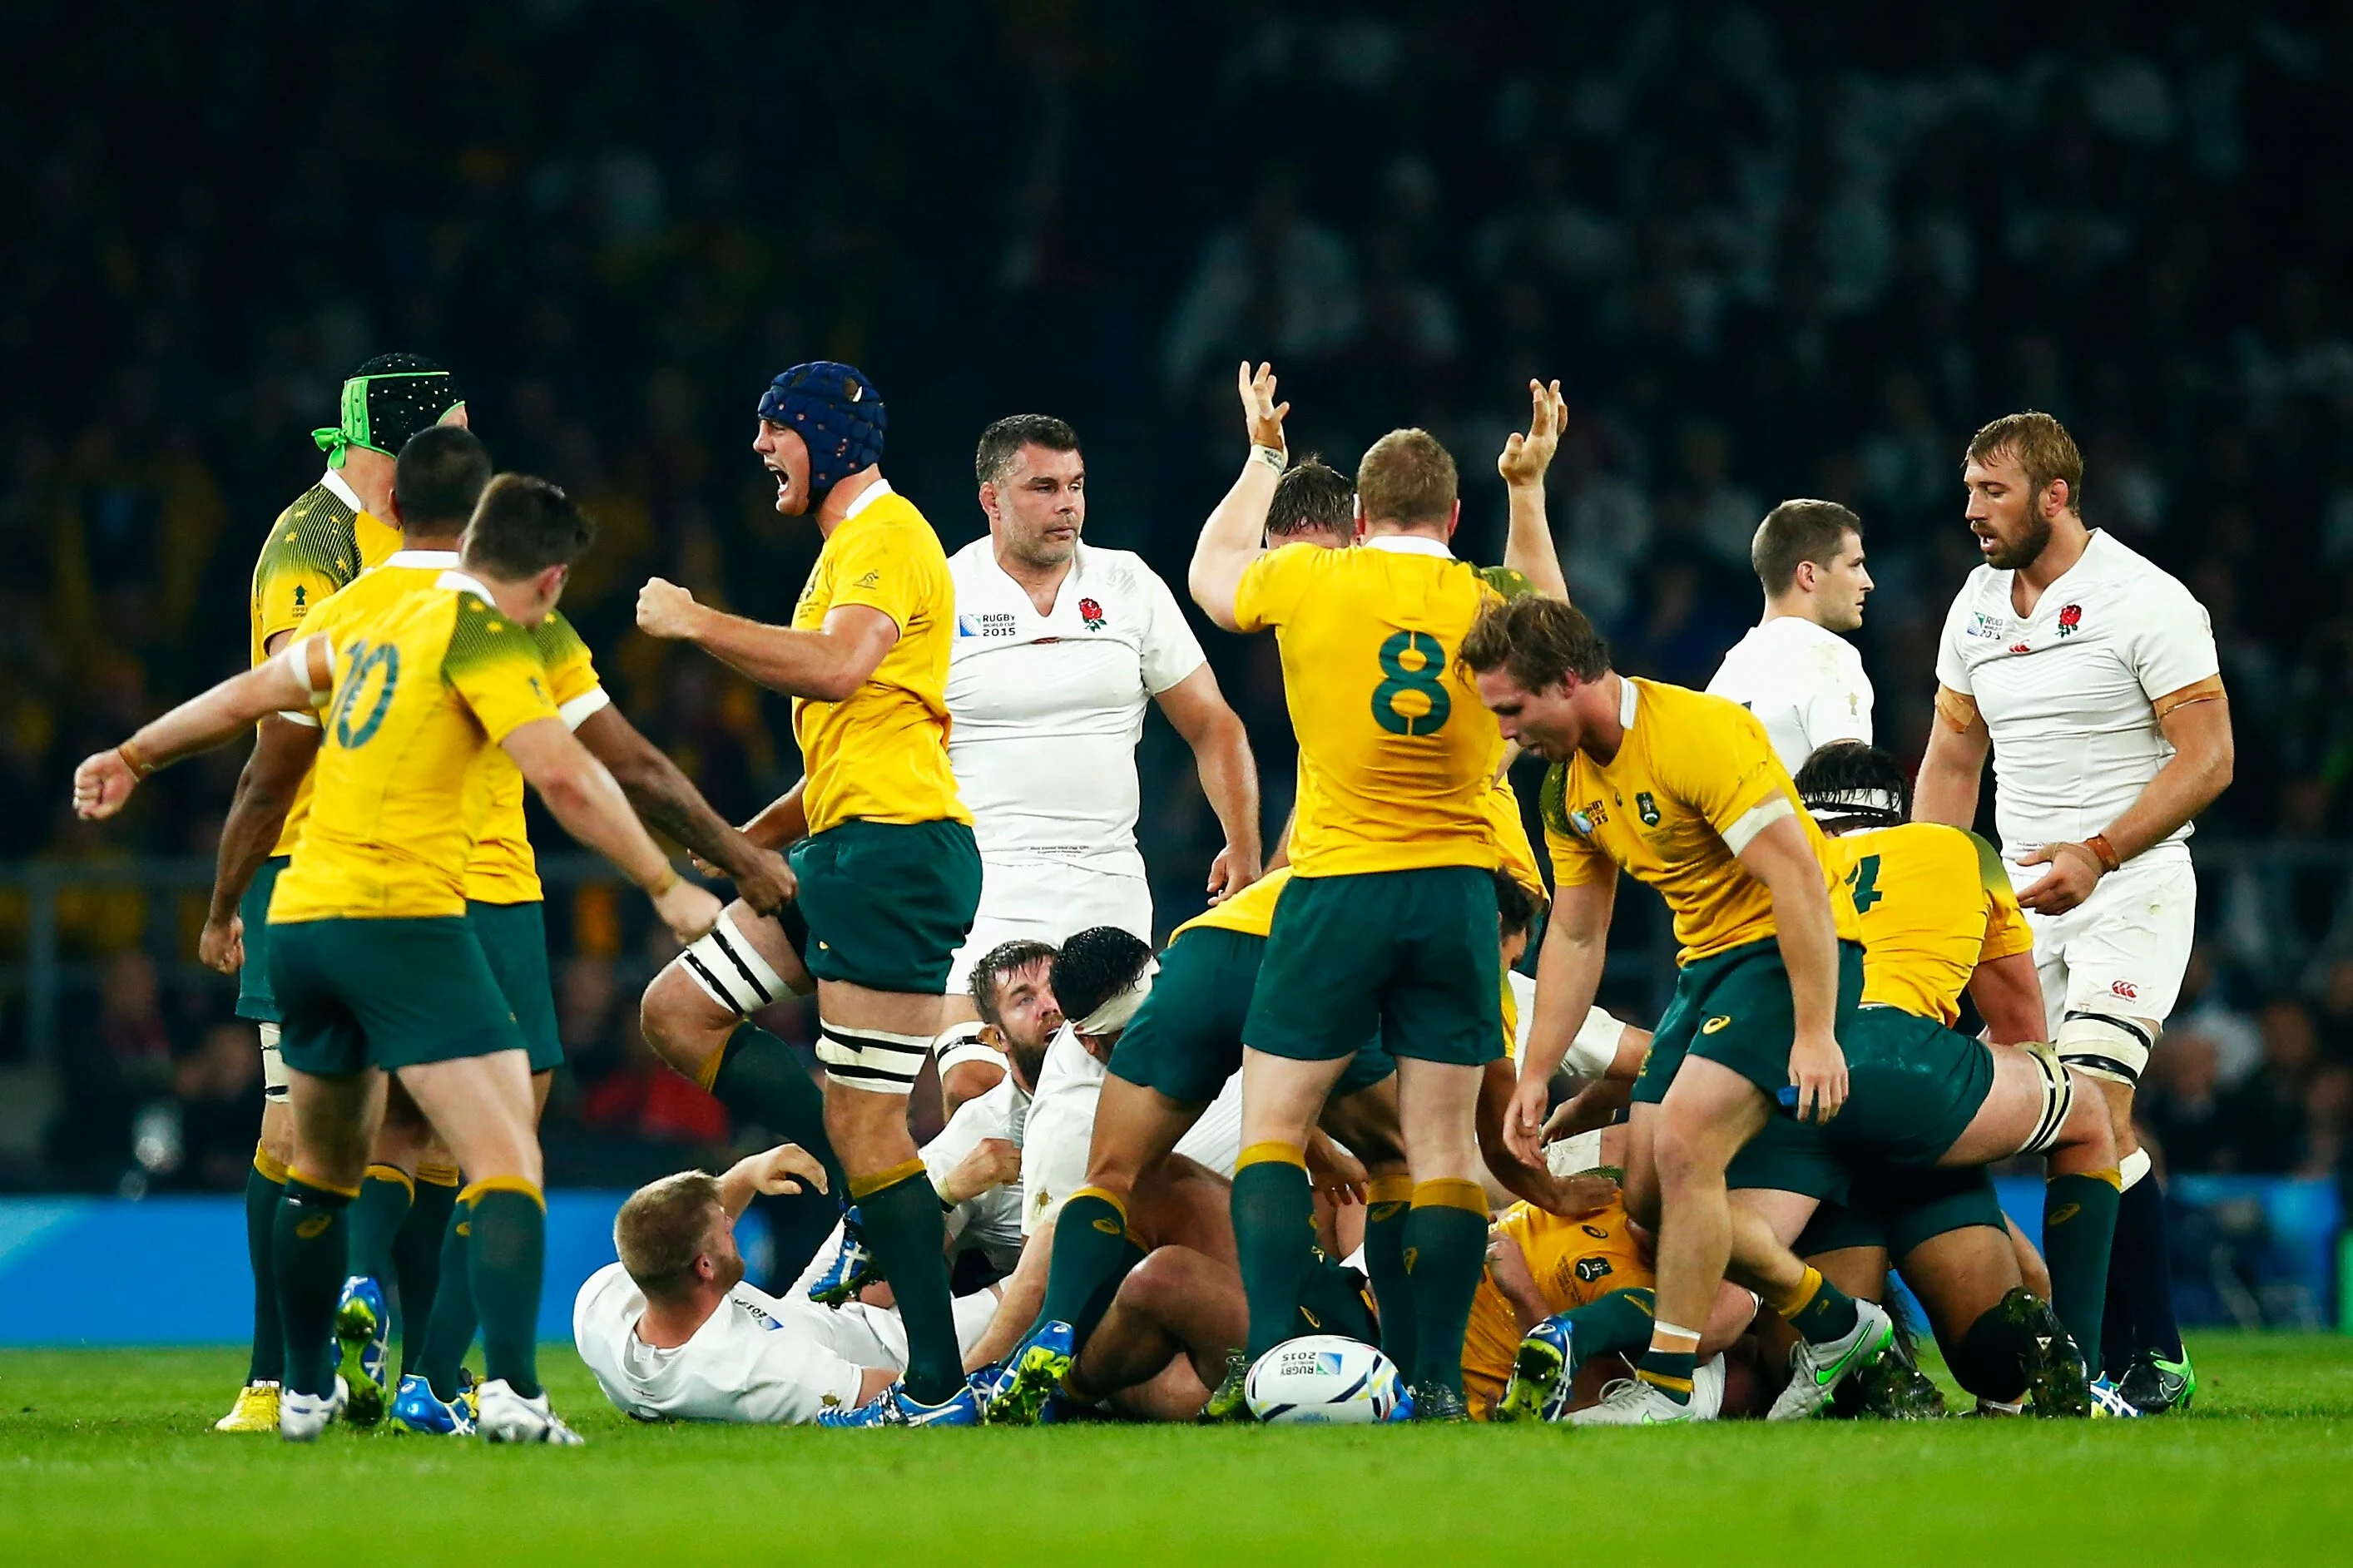 England v Australia - Group A: Rugby World Cup 2015